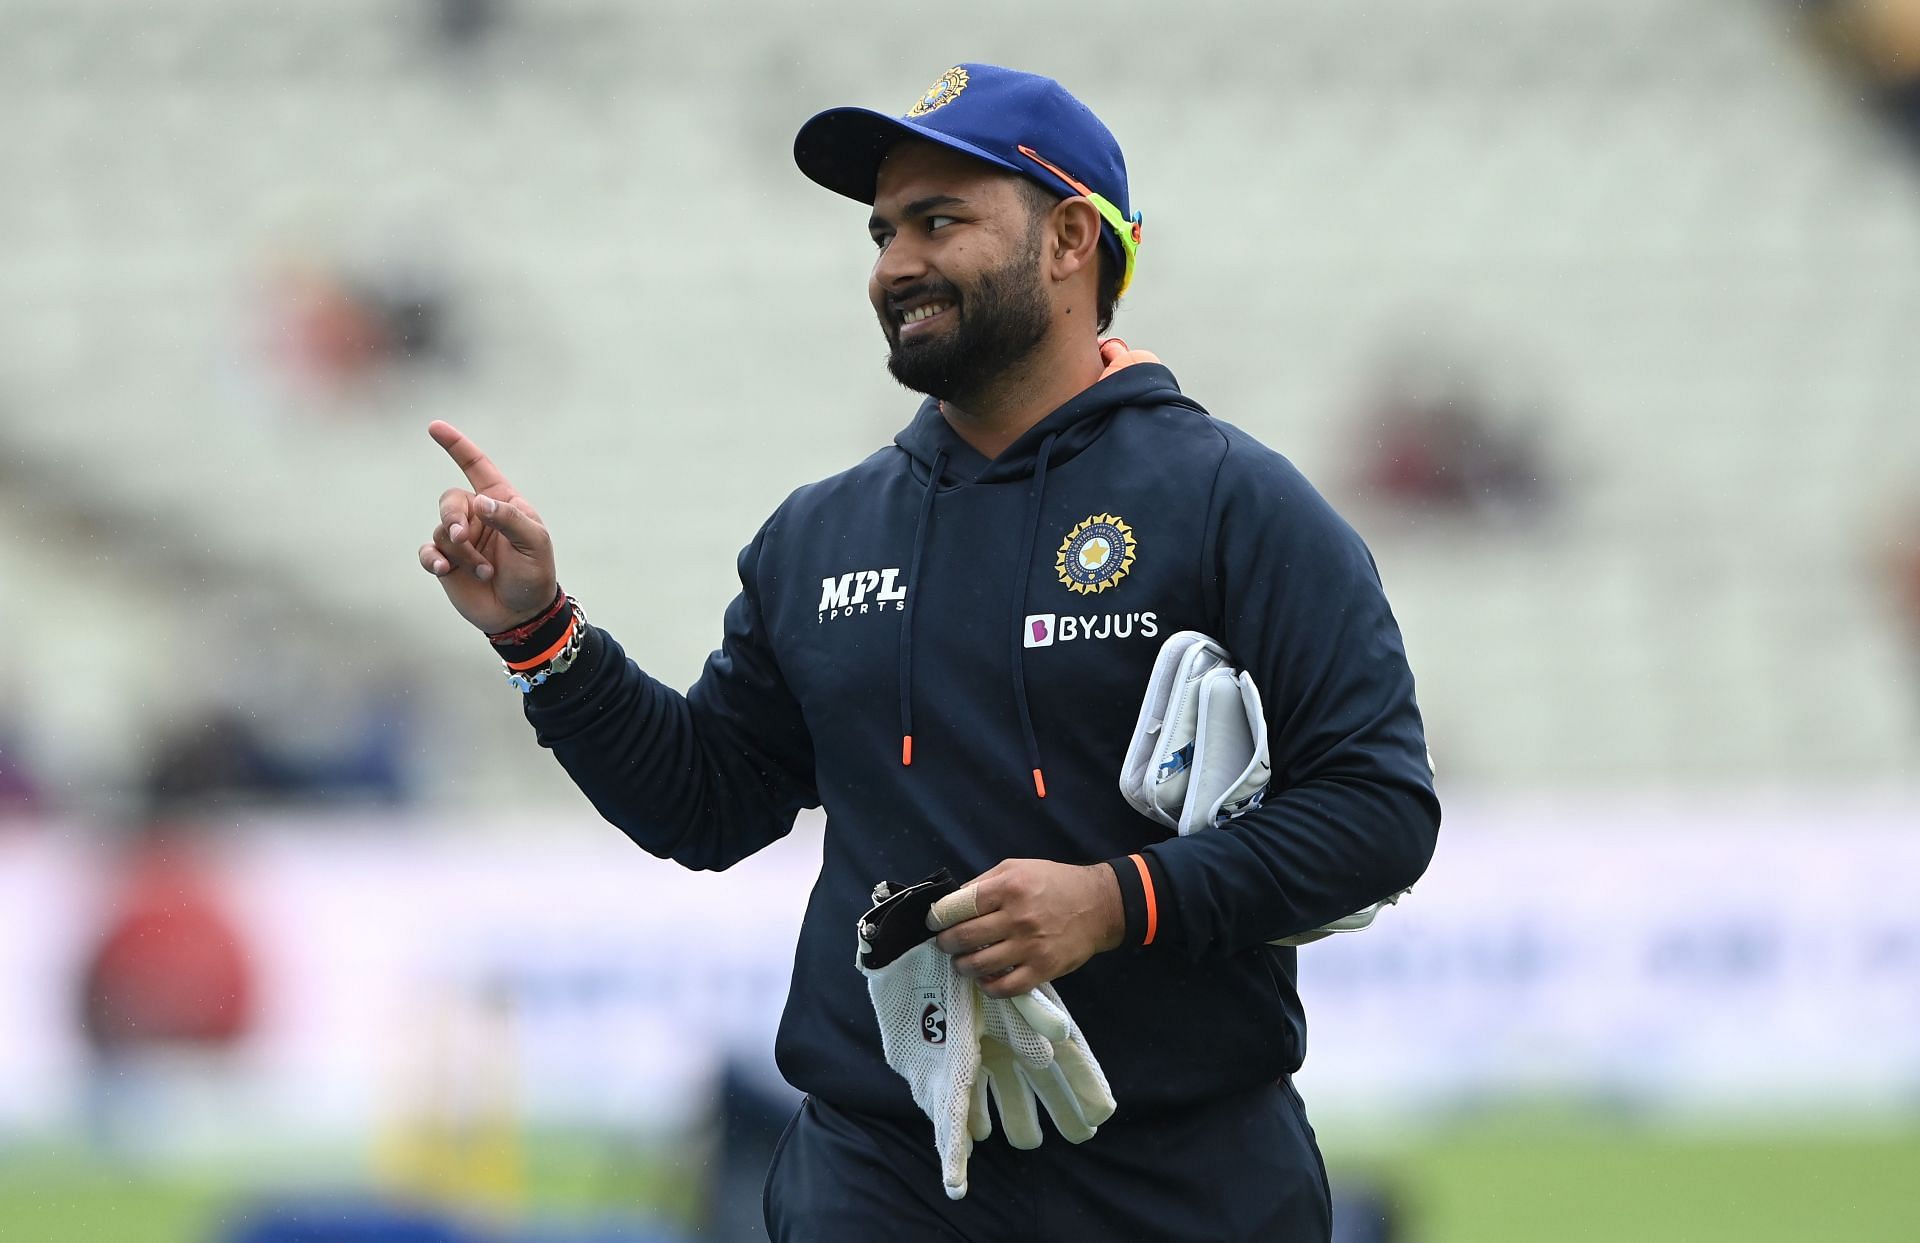 Rishabh Pant is on his way back to full fitness